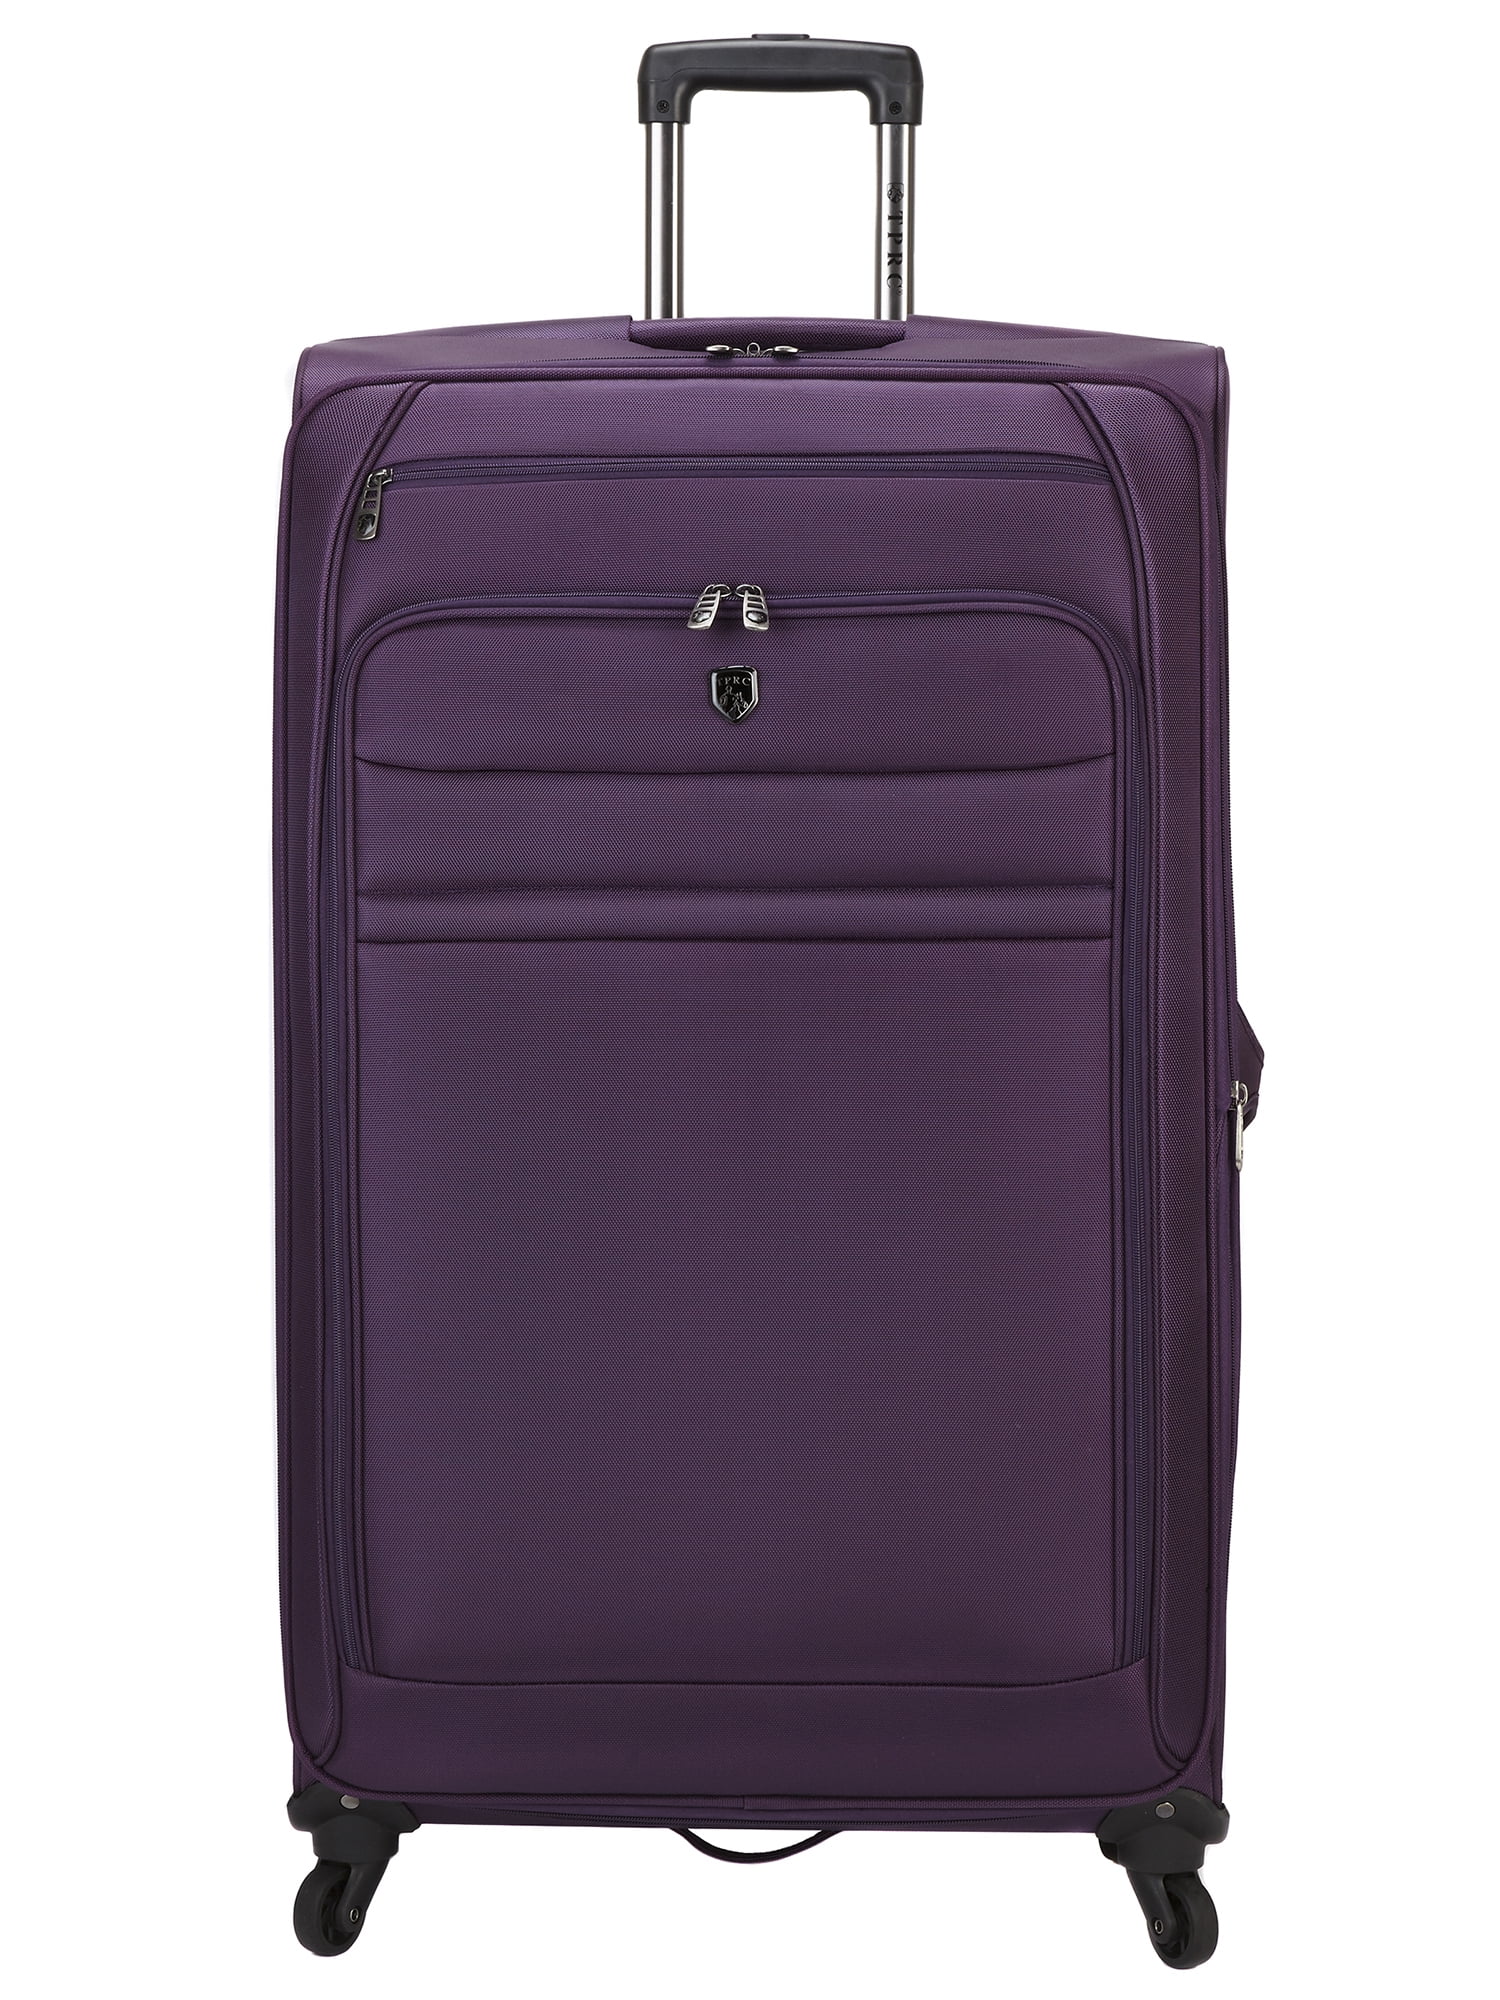 TPRC Lexington II 32” Rolling Expandable 4-Wheel Spinner Luggage - Walmart+ Cyber Monday starting 11/26 at 4 pm - $39.67